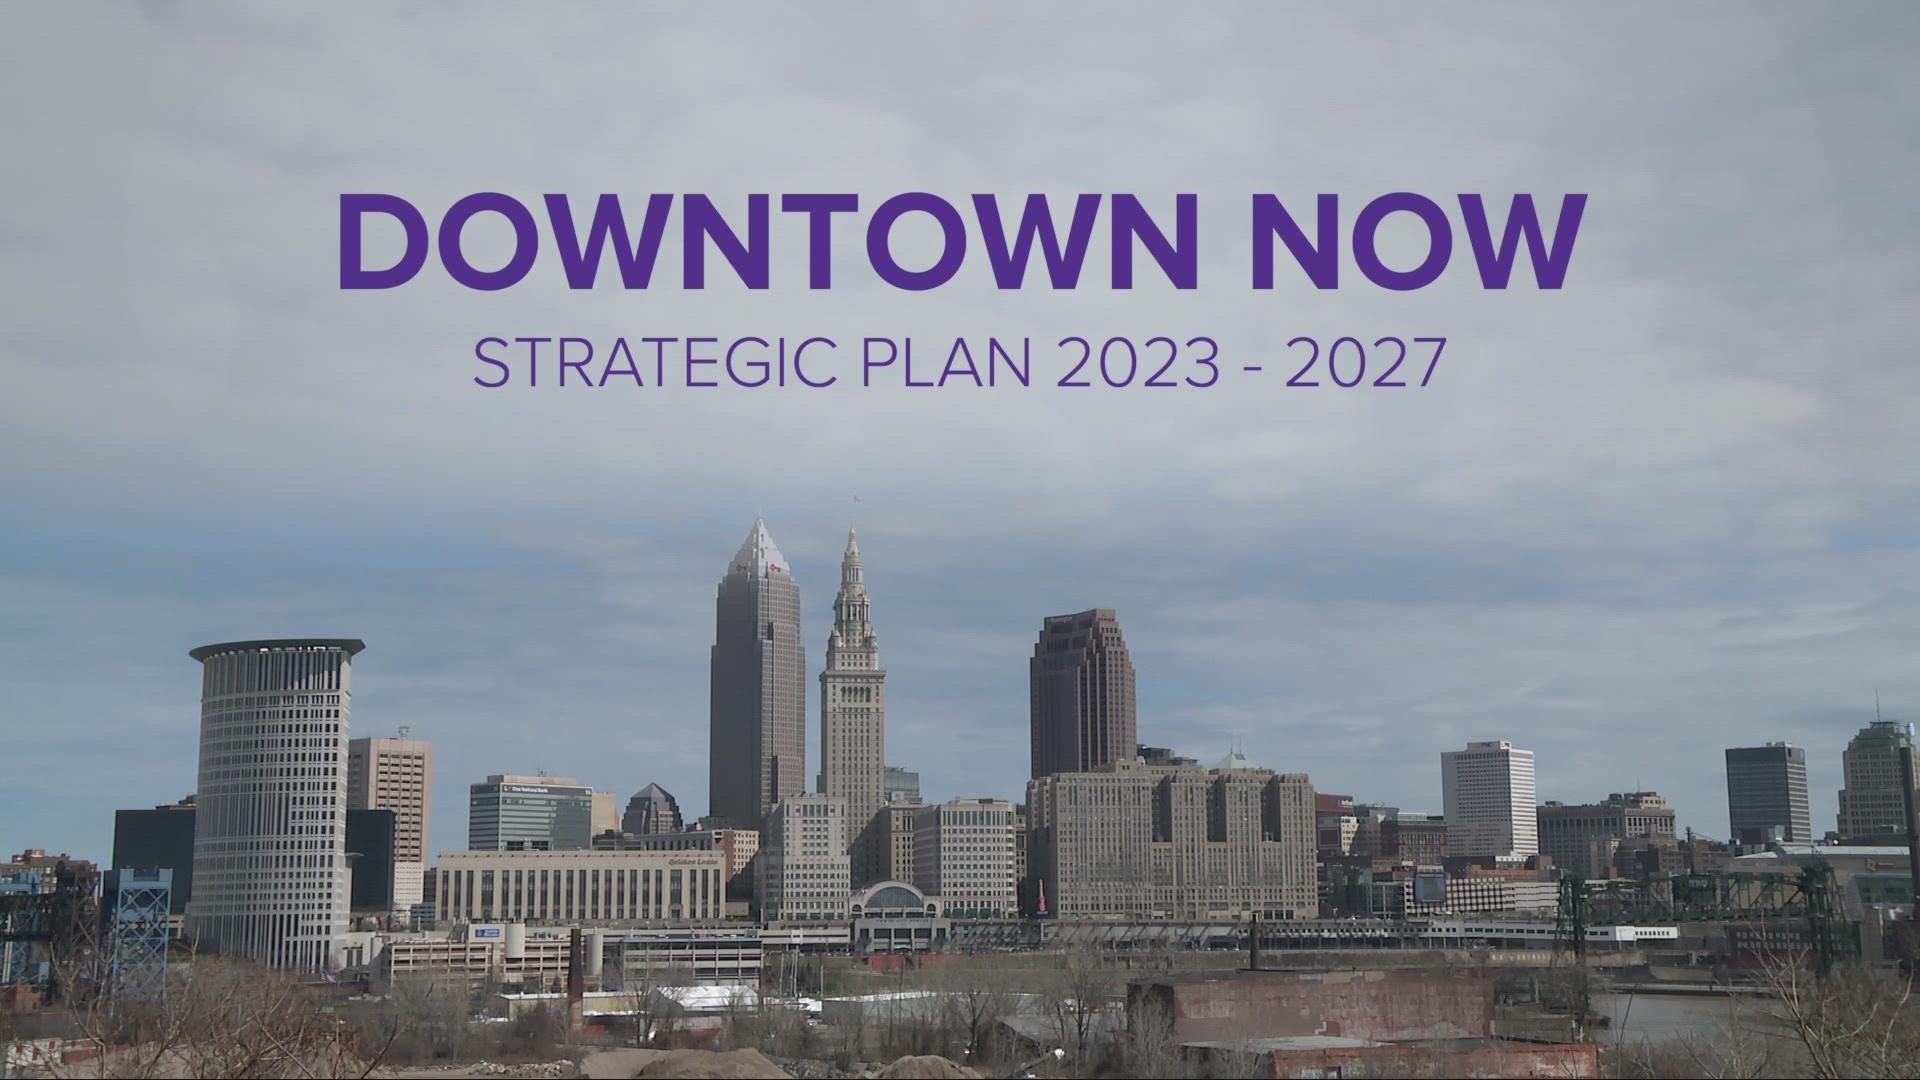 Downtown Cleveland has made strides to recovery after the pandemic, and has the tools to build a stronger future.